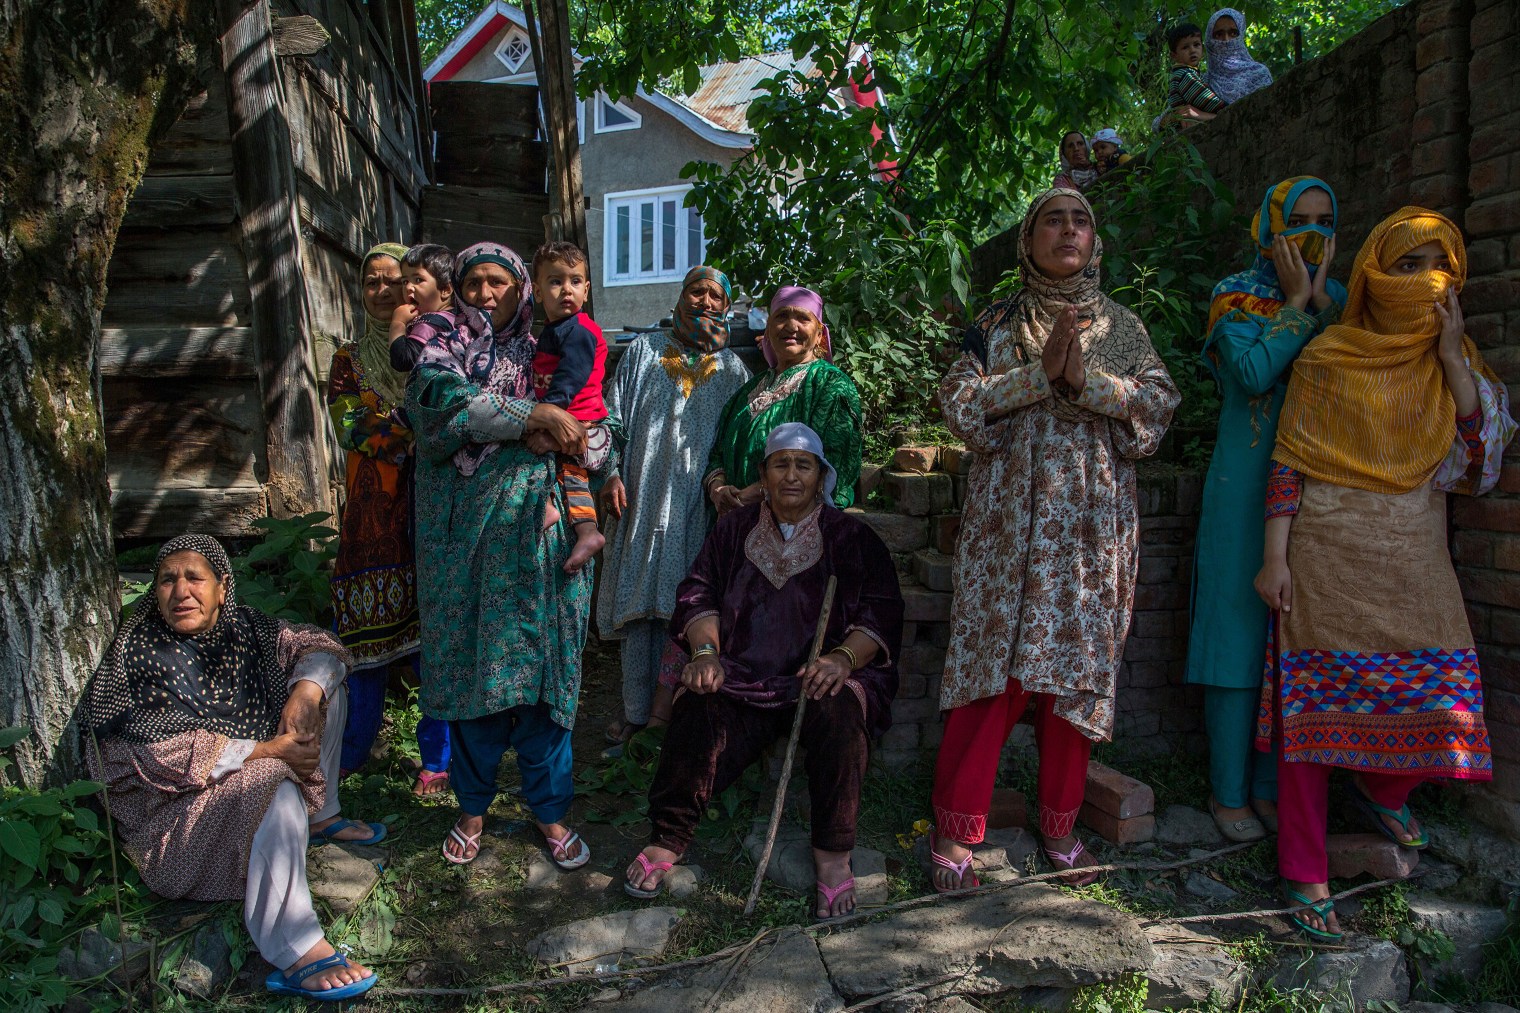 Women grieve as they watch the funeral procession of rebel leader Sabzar Ahmed Bhat in Retsuna, 45 Kilometers south of Srinagar on May 28, 2017. Thousands of people assembled in southern Tral area to take part in the funeral of the rebel leader Sabzar Ahmed Bhat, chanting slogans calling for Kashmir's freedom from Indian rule.